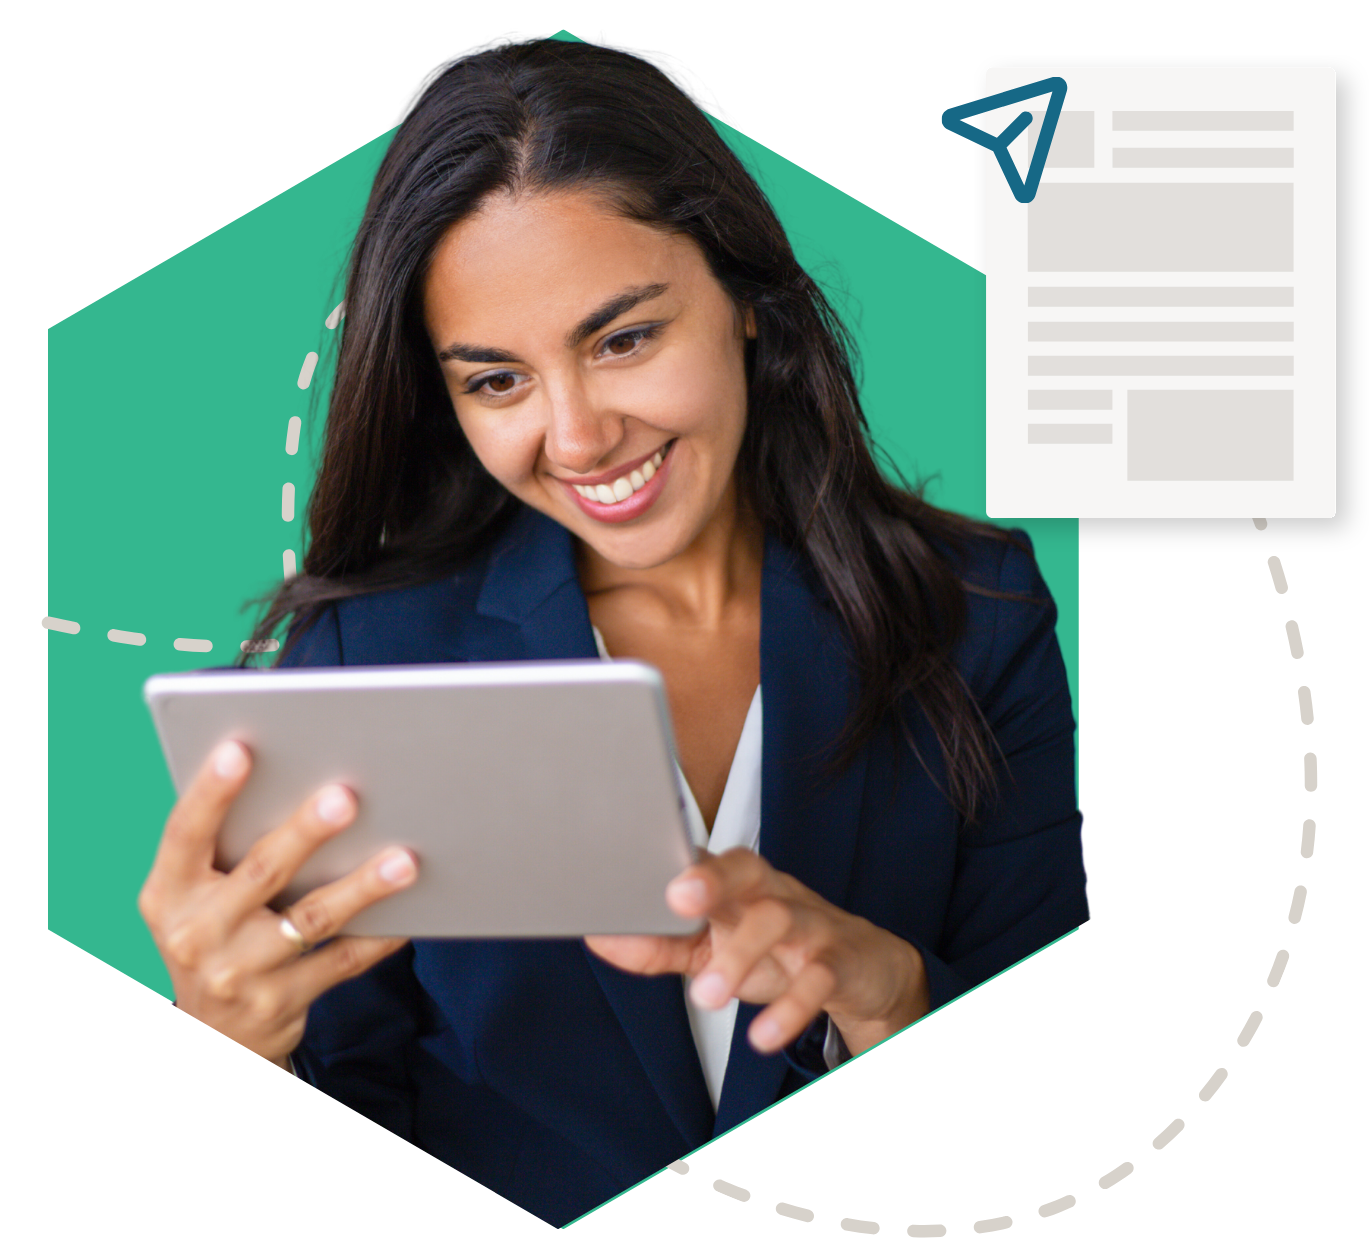 Person smiling at tablet with document sharing illustration